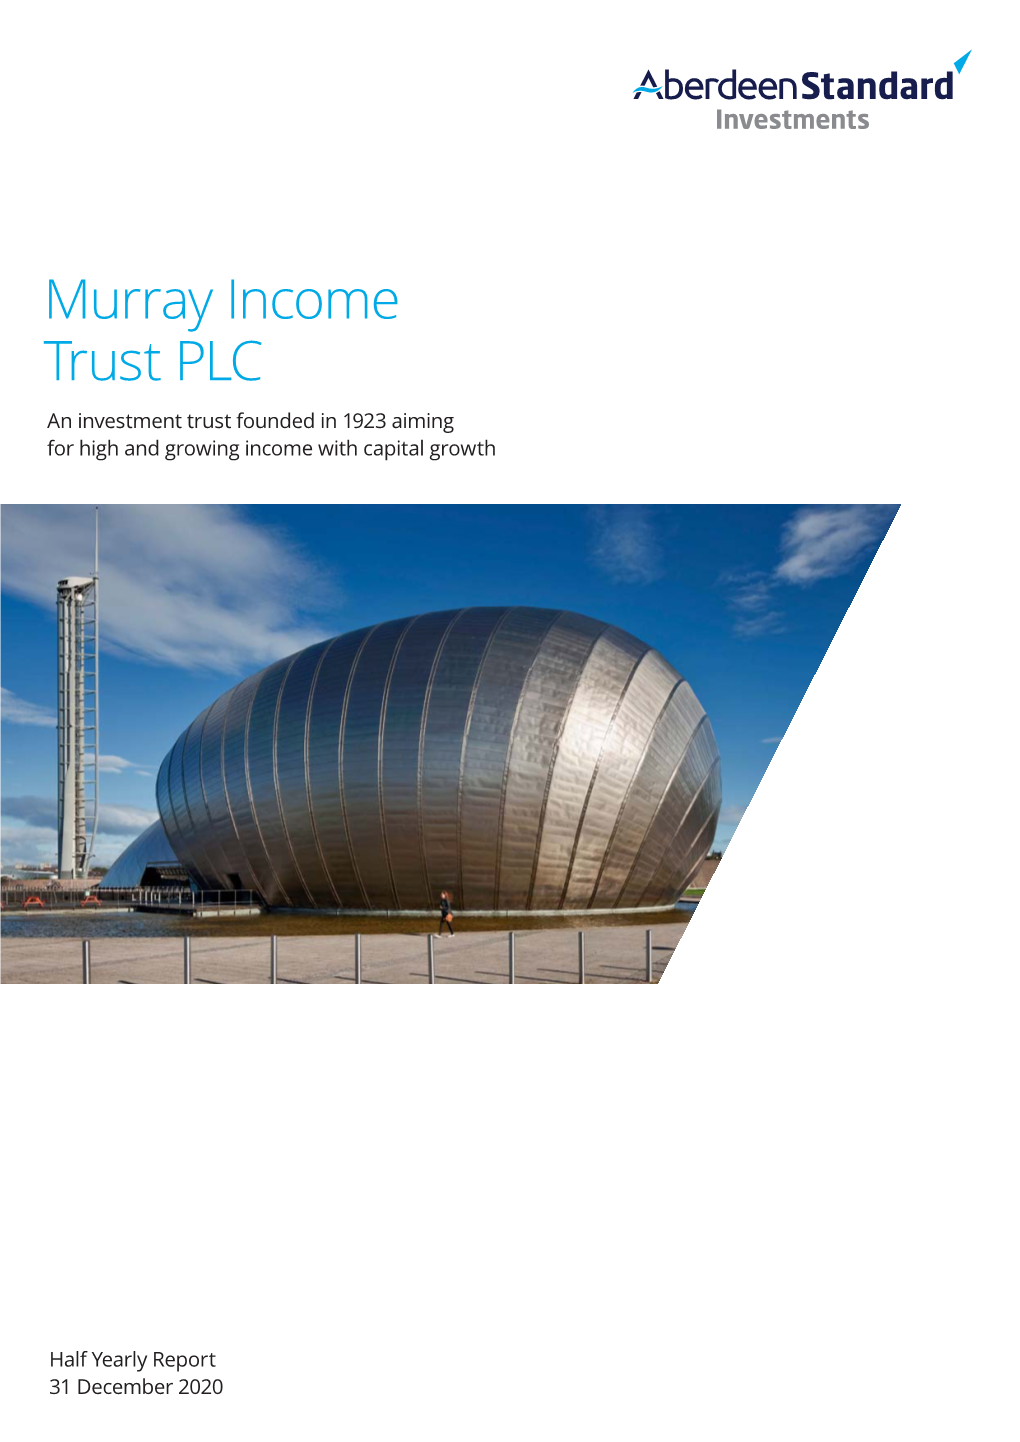 Murray Income Trust PLC an Investment Trust Founded in 1923 Aiming for High and Growing Income with Capital Growth